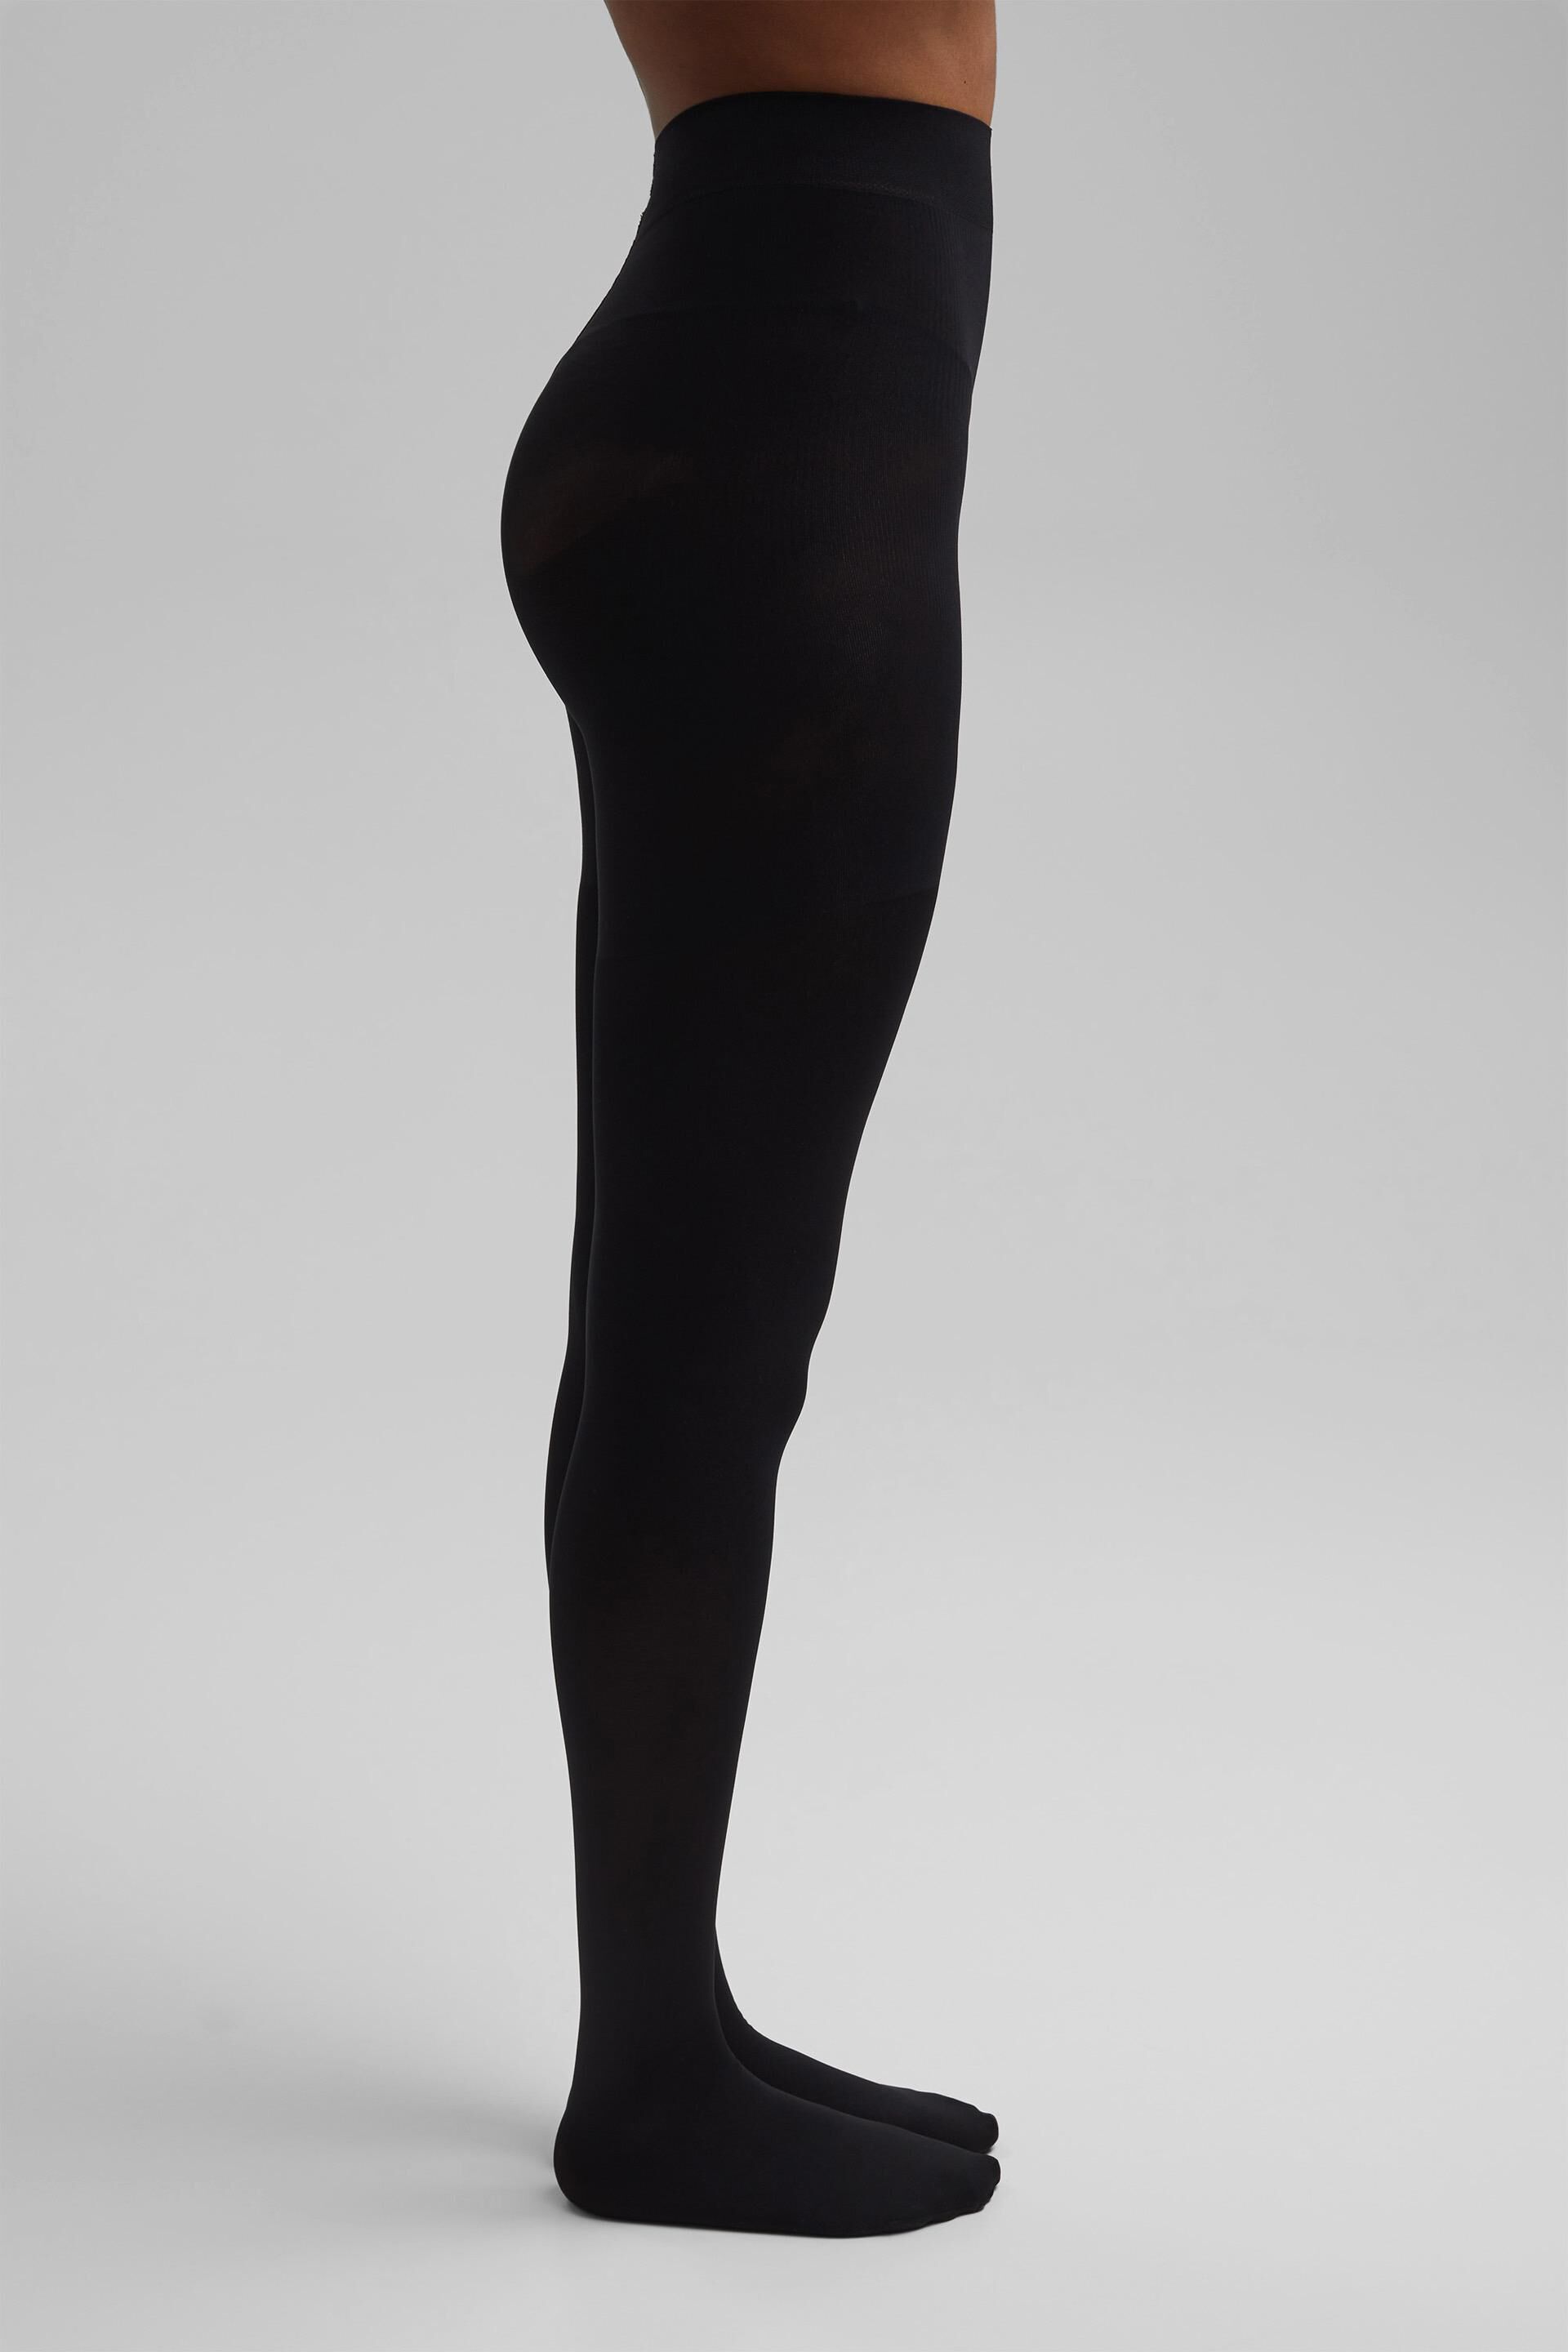 Esprit Online Store Tights with a shaping effect, 80 den